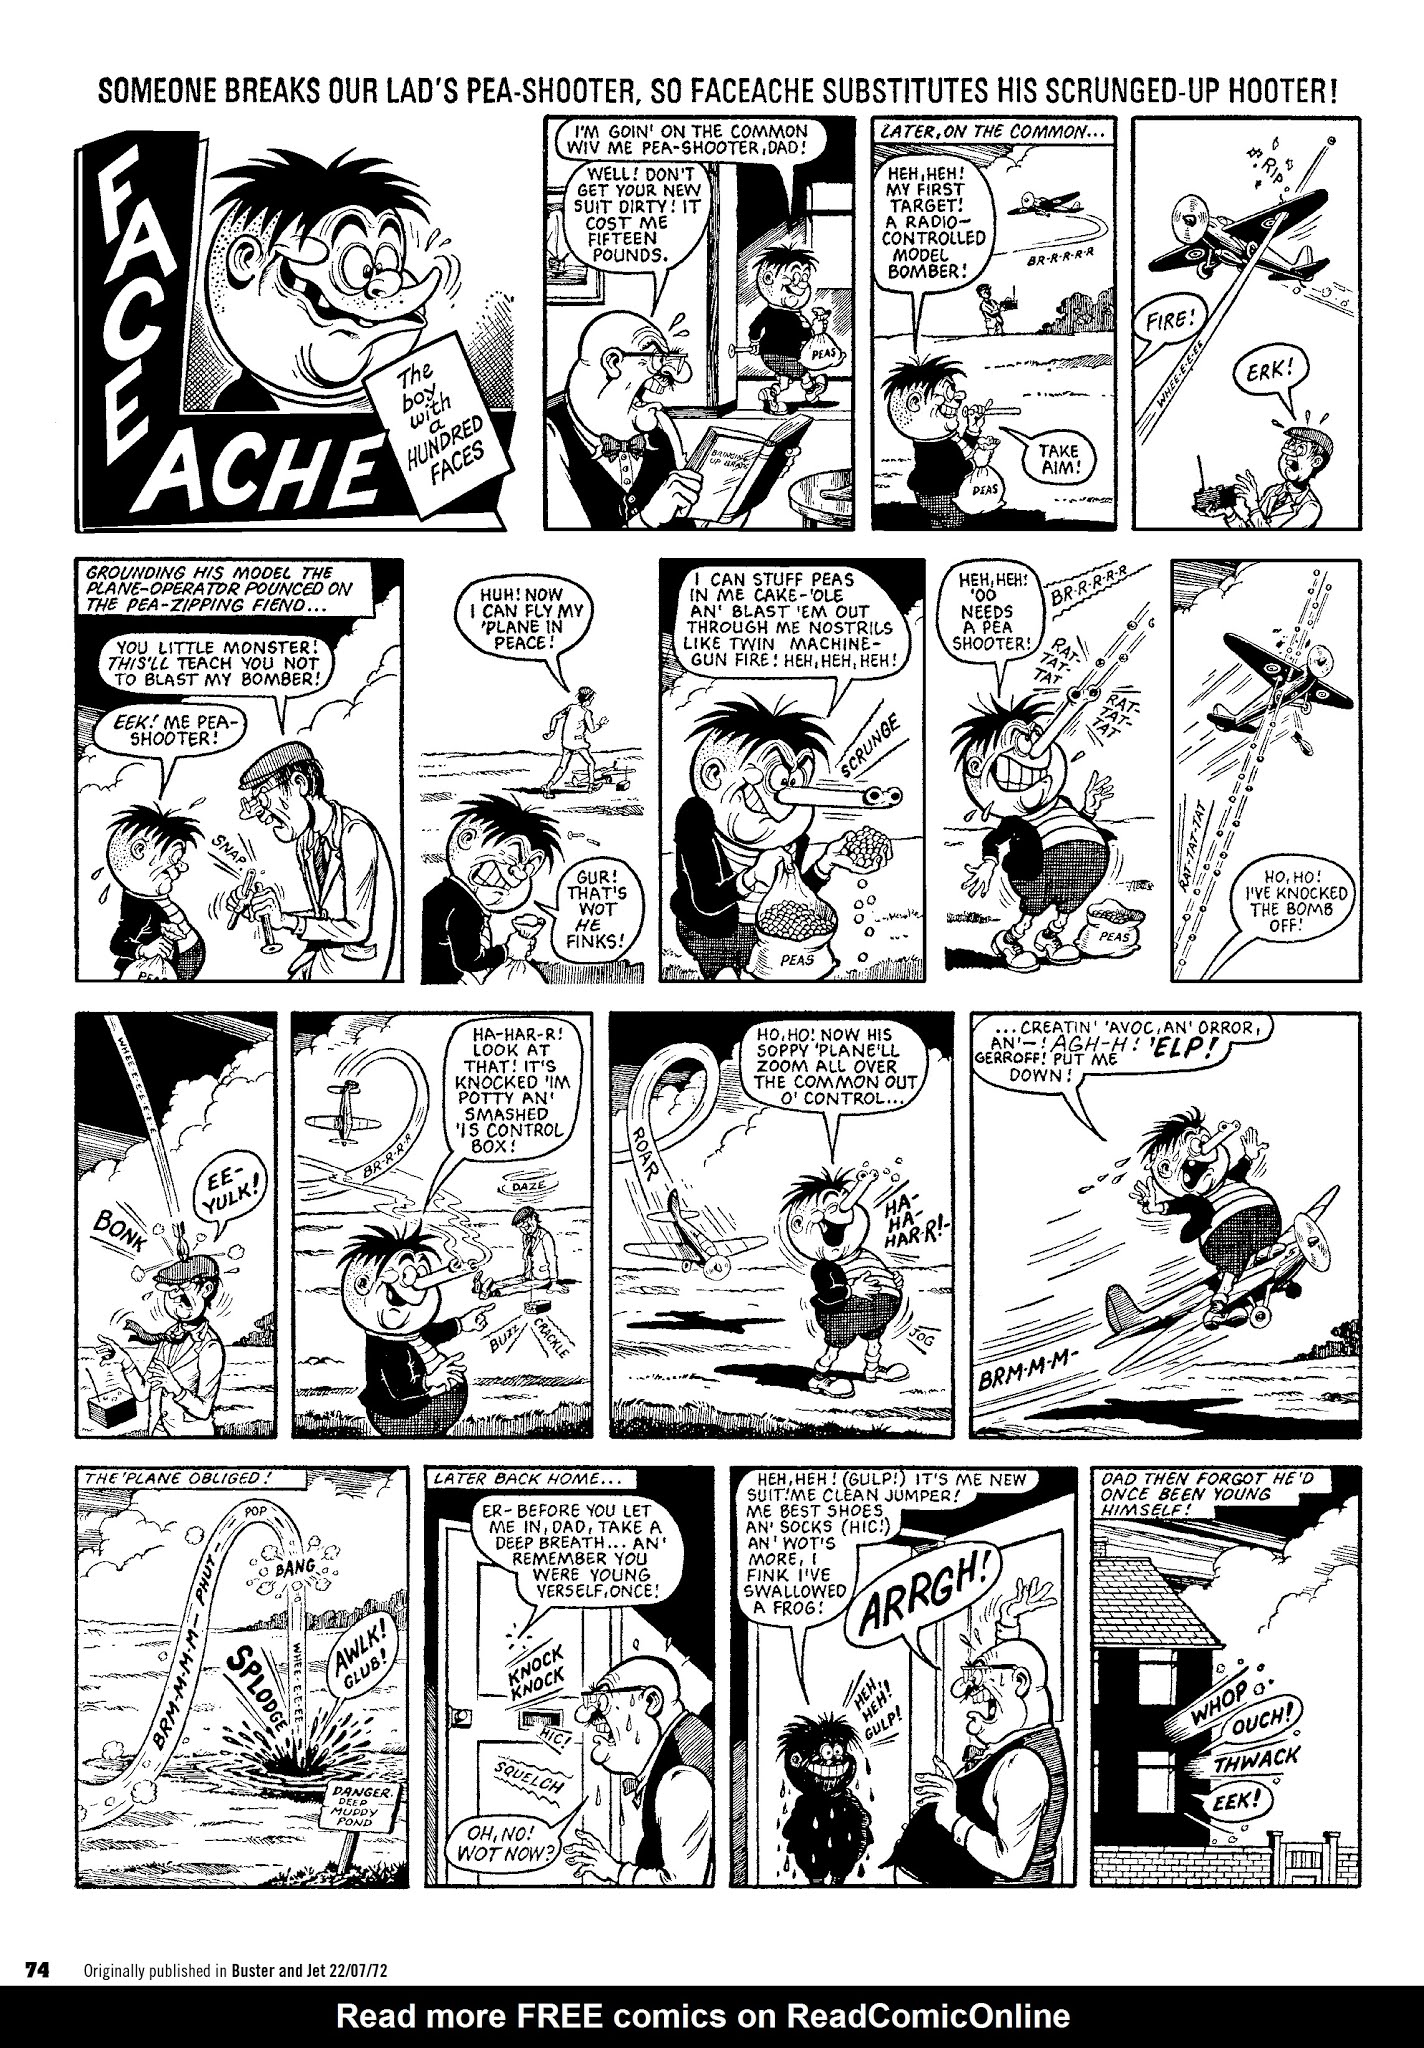 Read online Faceache: The First Hundred Scrunges comic -  Issue # TPB 1 - 76